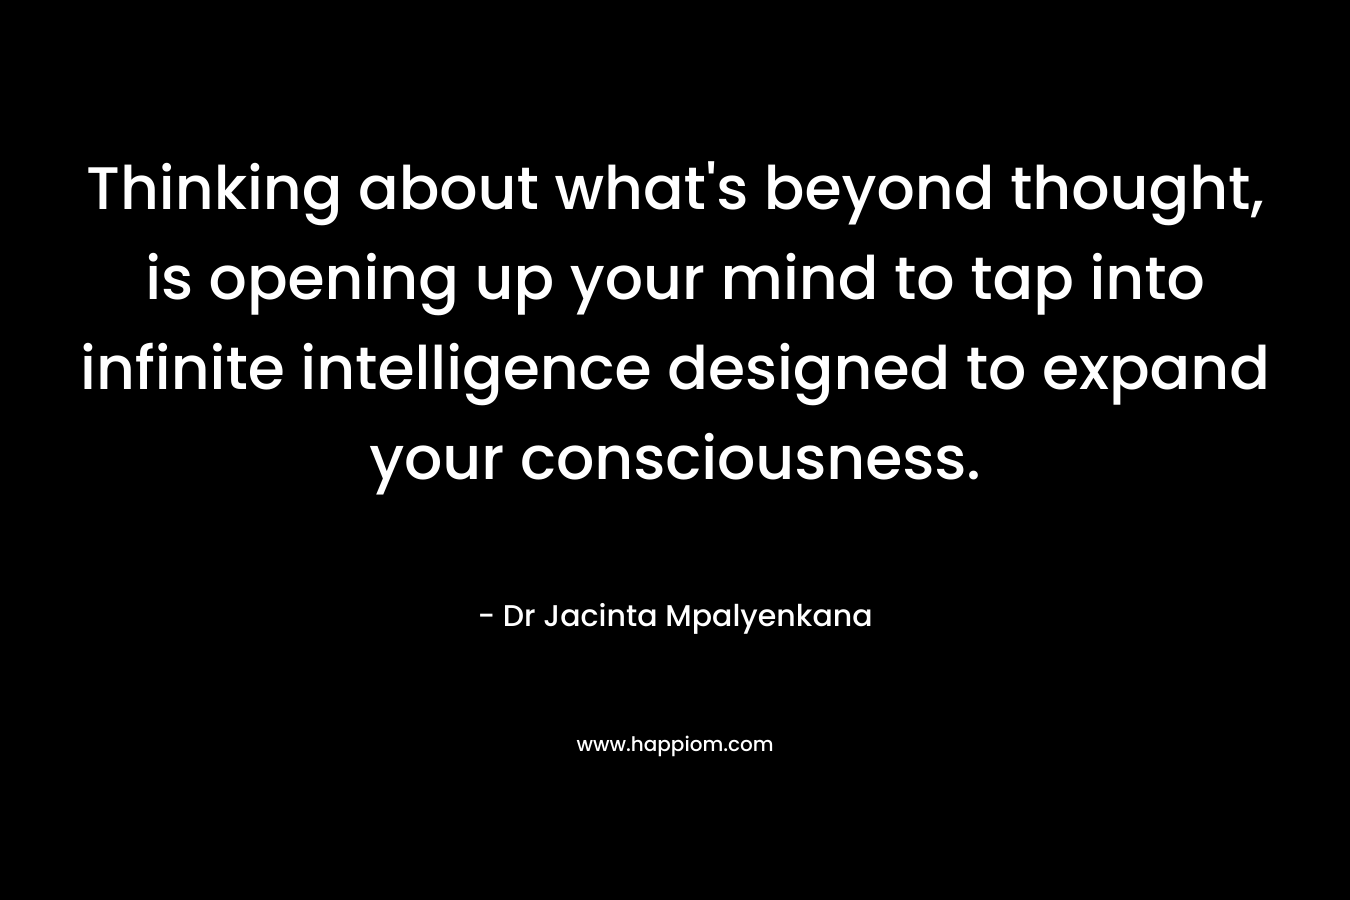 Thinking about what's beyond thought, is opening up your mind to tap into infinite intelligence designed to expand your consciousness.